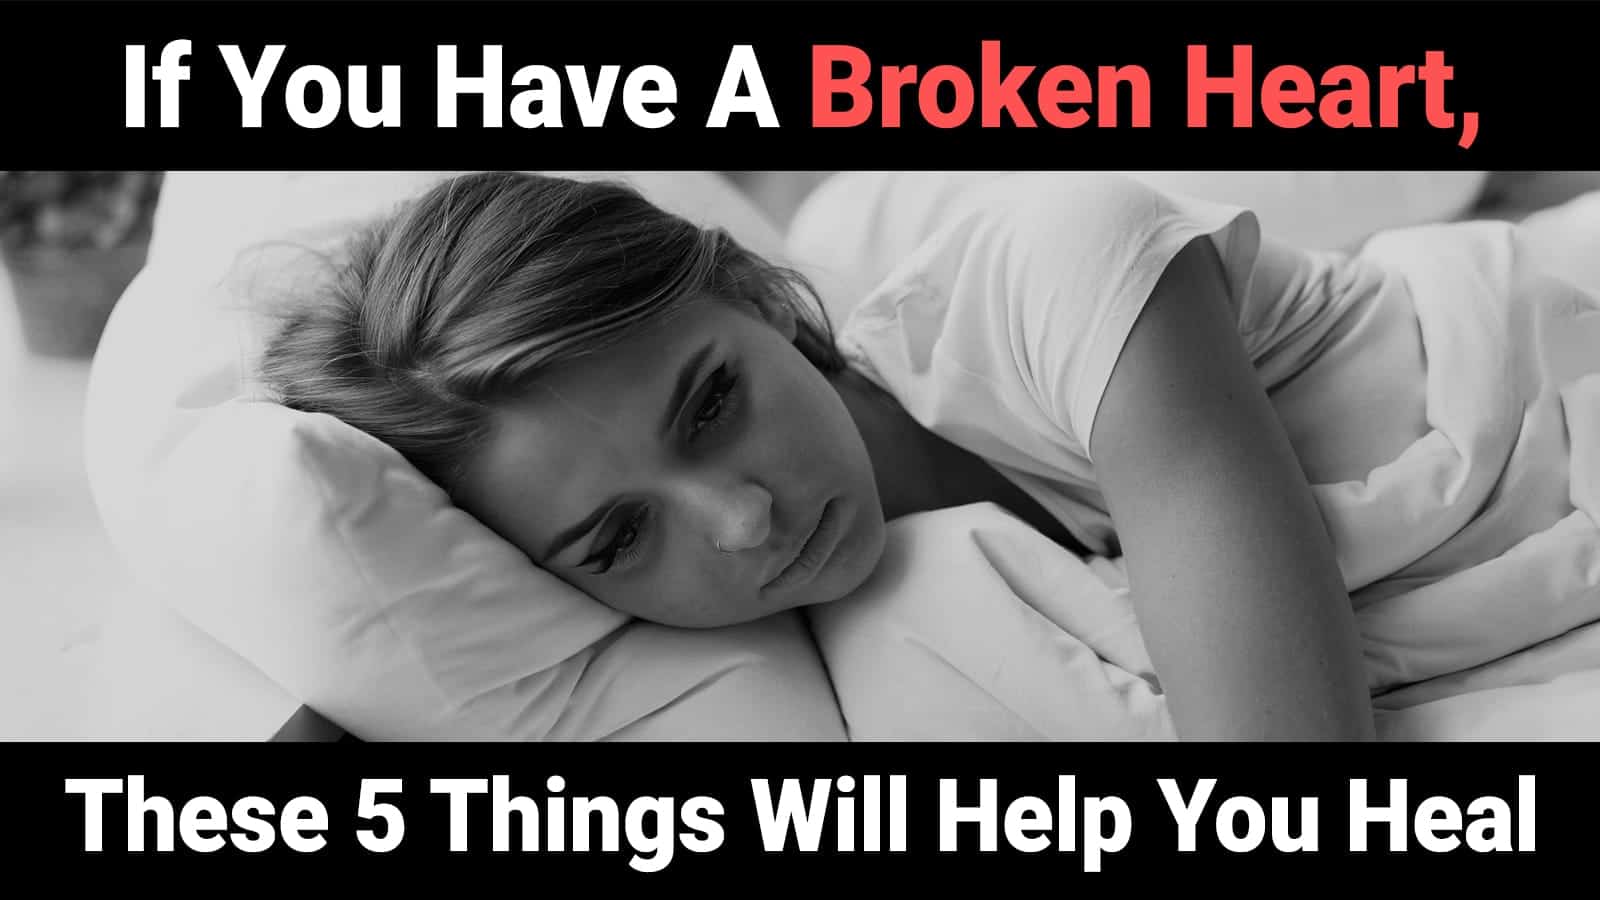 If You Have A Broken Heart, These 5 Things Will Help You Heal